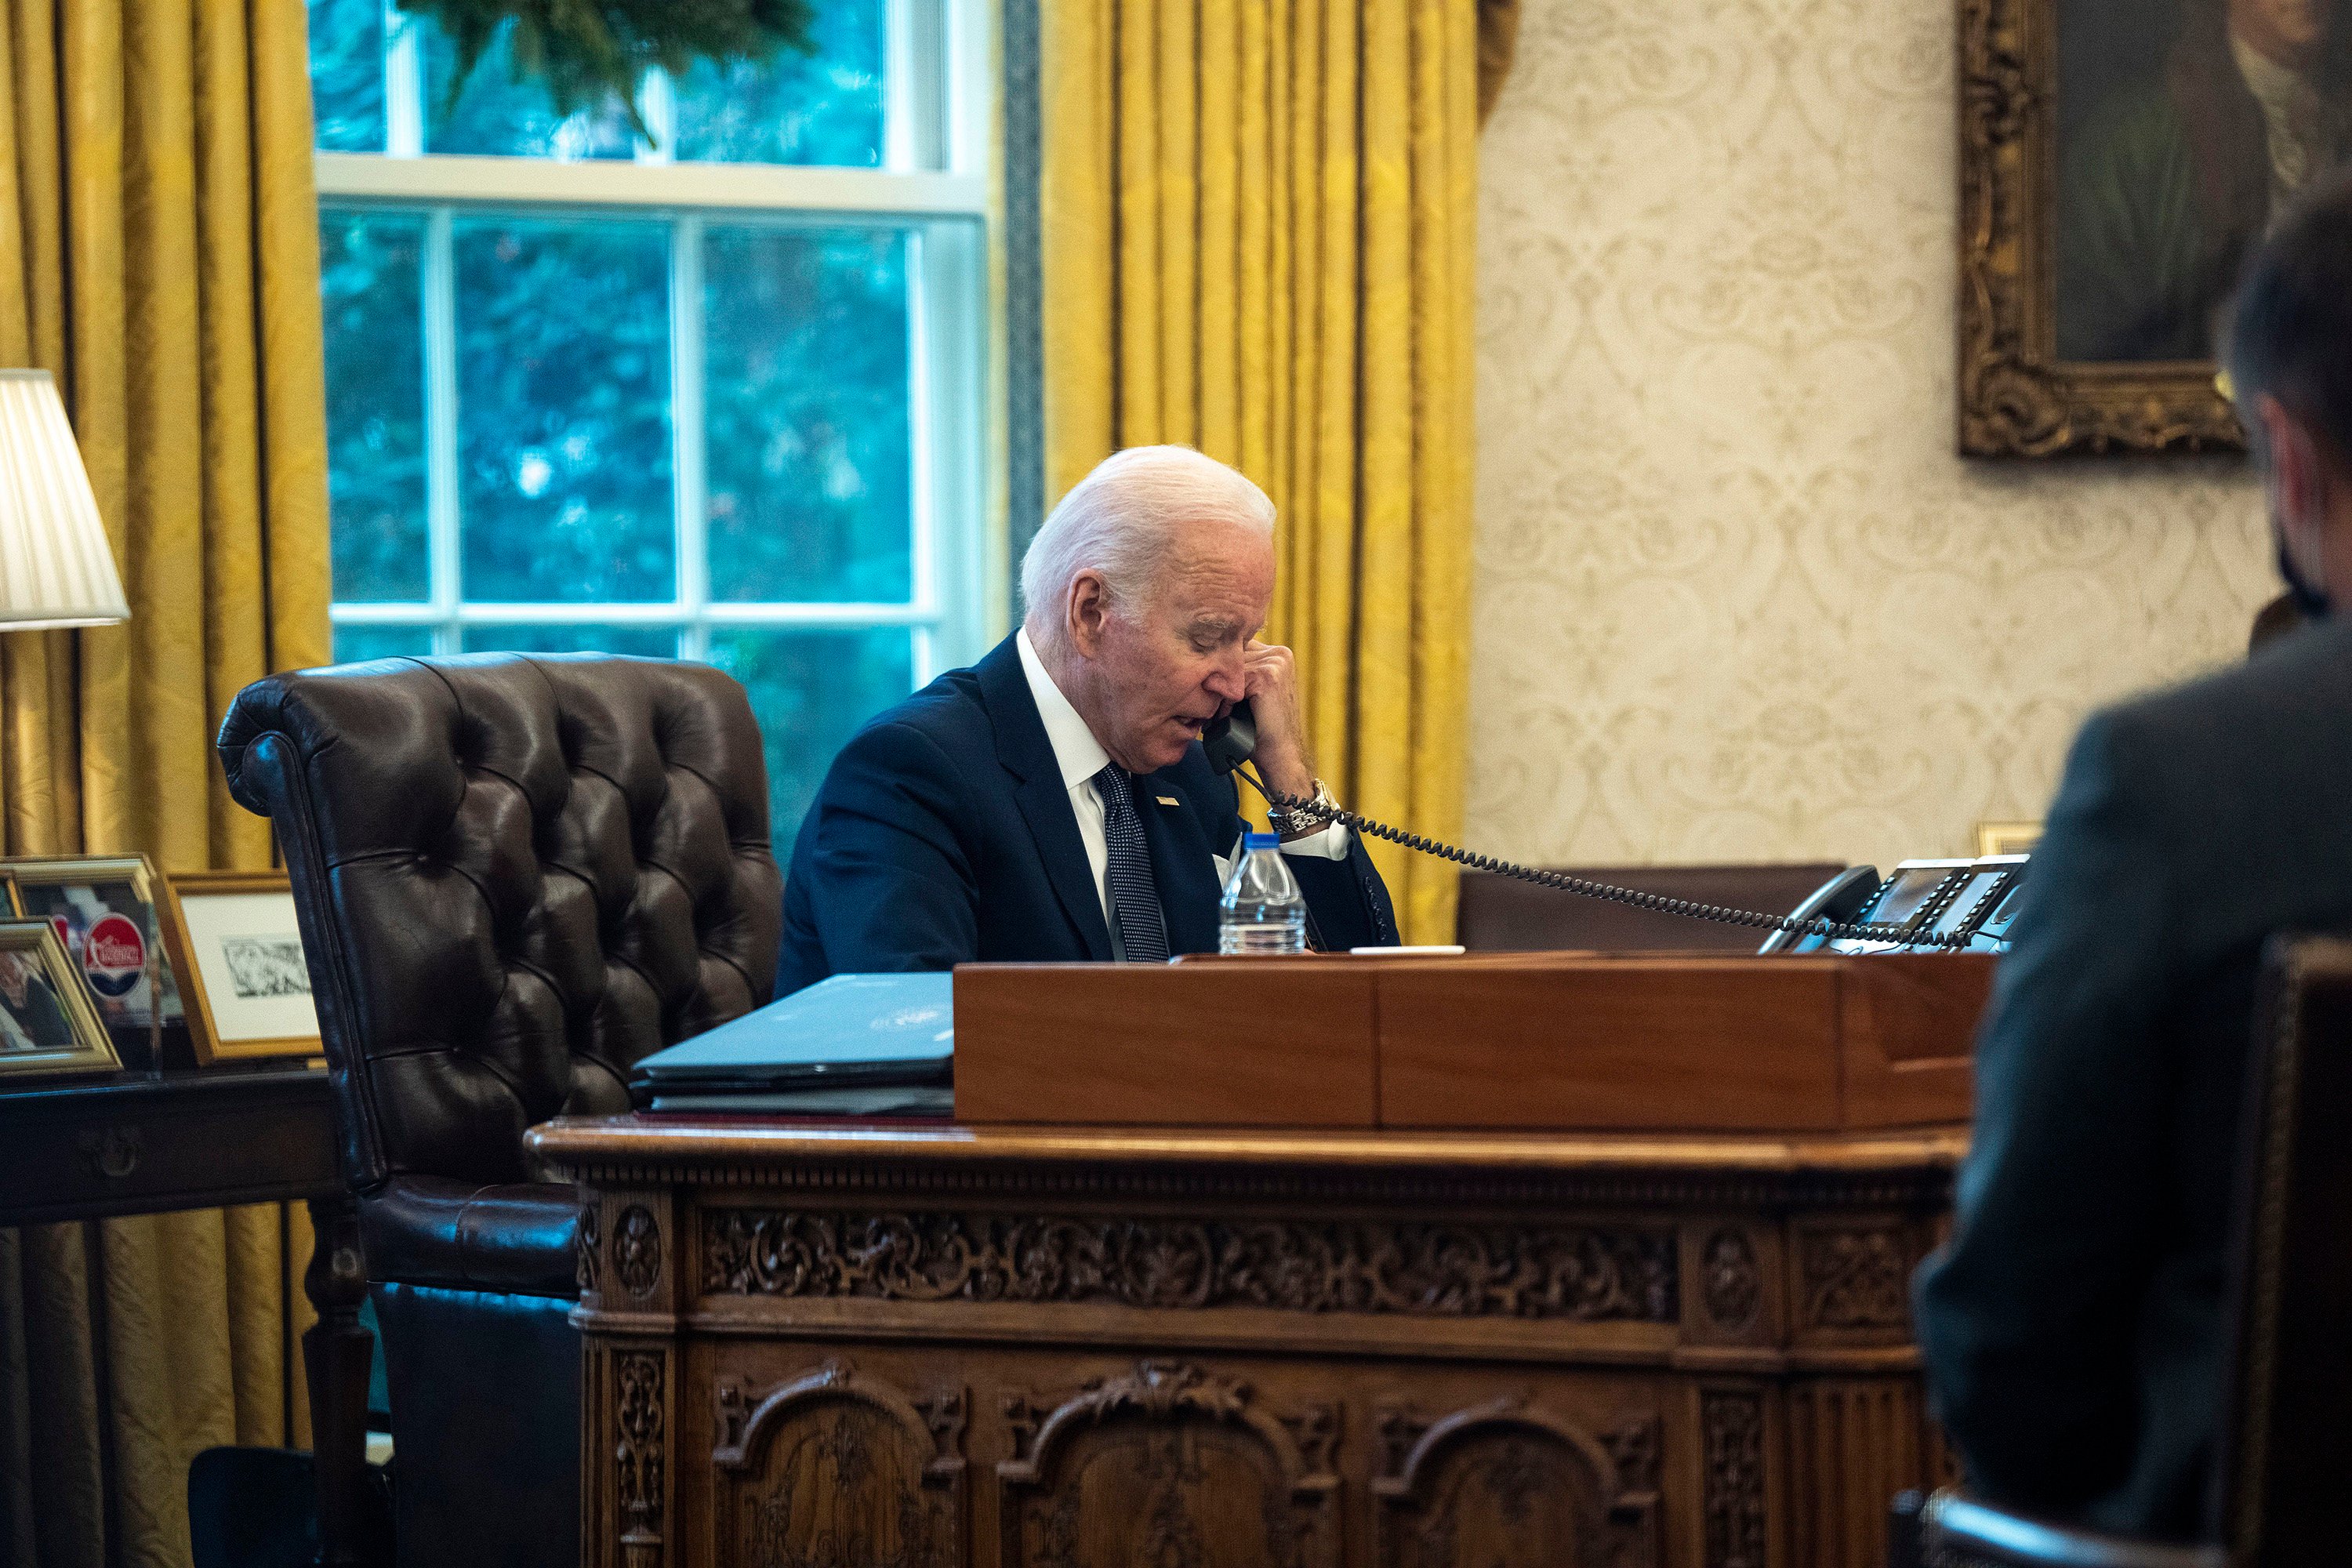 President Joe Biden, seen here in the Oval Office in 2021, has spoken with the sultan of Oman about China’s plans to increase its defence presence in the Middle East. Photo: TNS